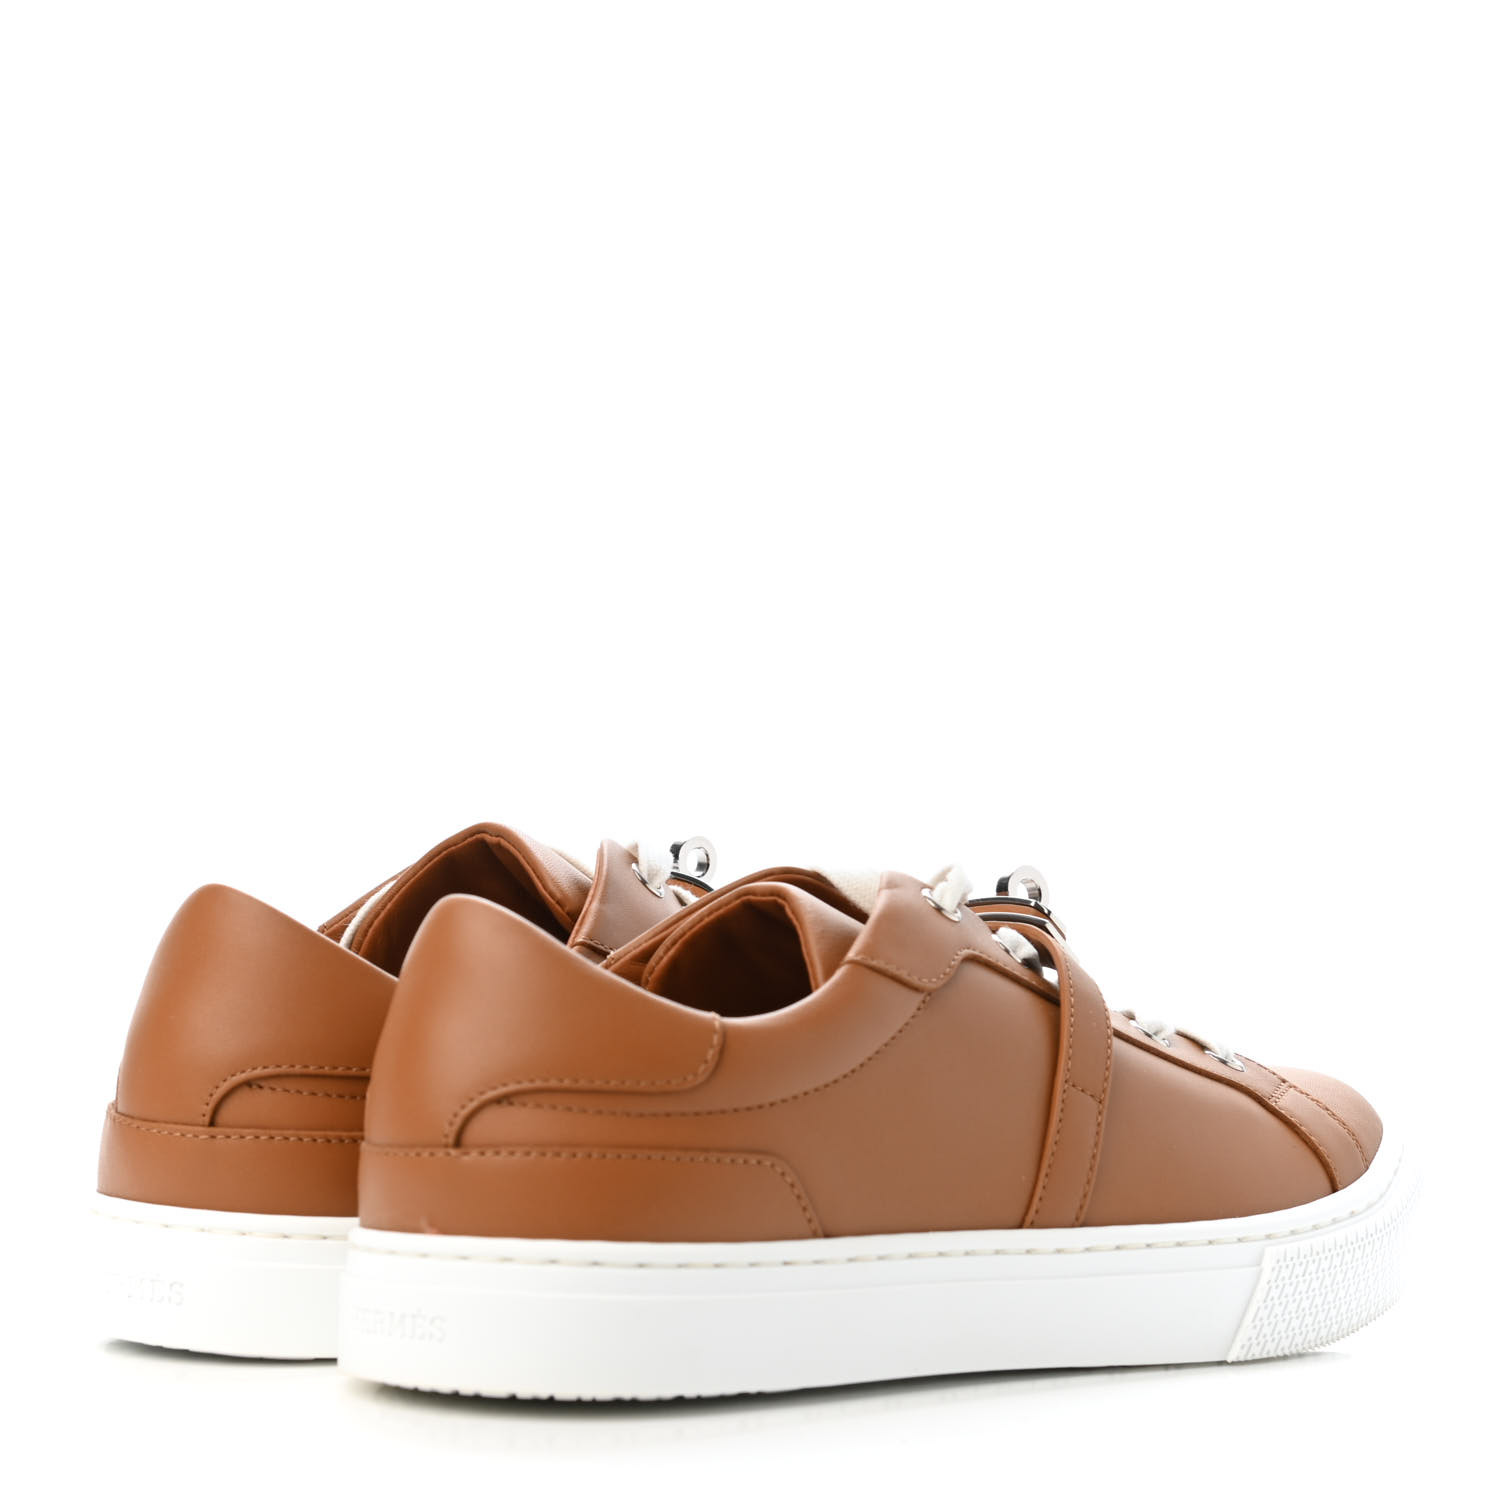 HERMES Calfskin Day Sneakers 39 Naturel 816353 | FASHIONPHILE